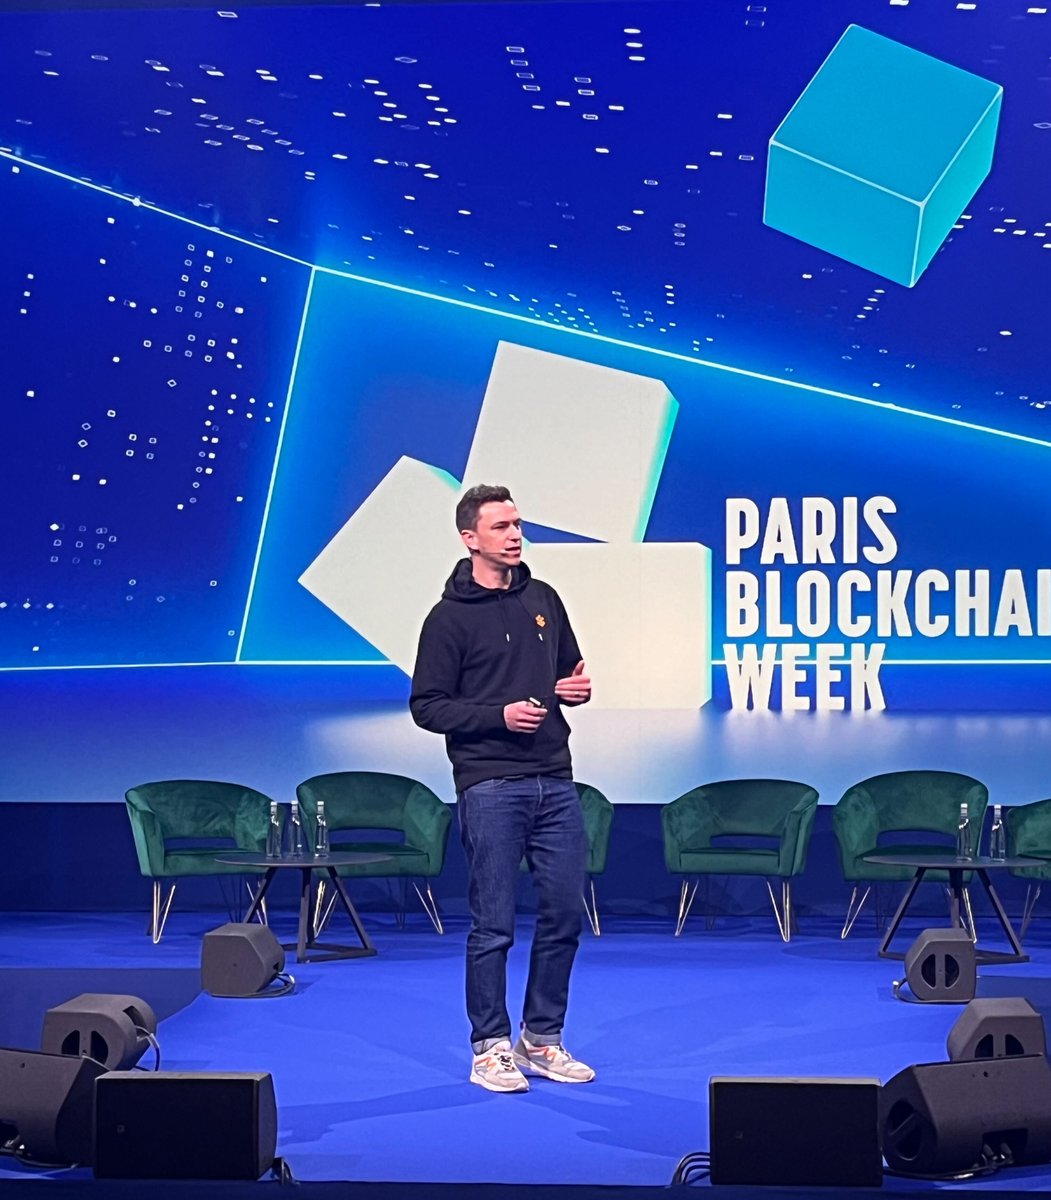 This is dope🔥 🚀 Just witnessed @danielfogg, CEO of @RootstockLabs, drop some serious Bitcoin knowledge bombs at @ParisBlockWeek! Talking all things on the Bitcoin ecosystem and how @rootstock_io is pioneering the Bitcoin L2 market Focused on making Bitcoin work for everyone